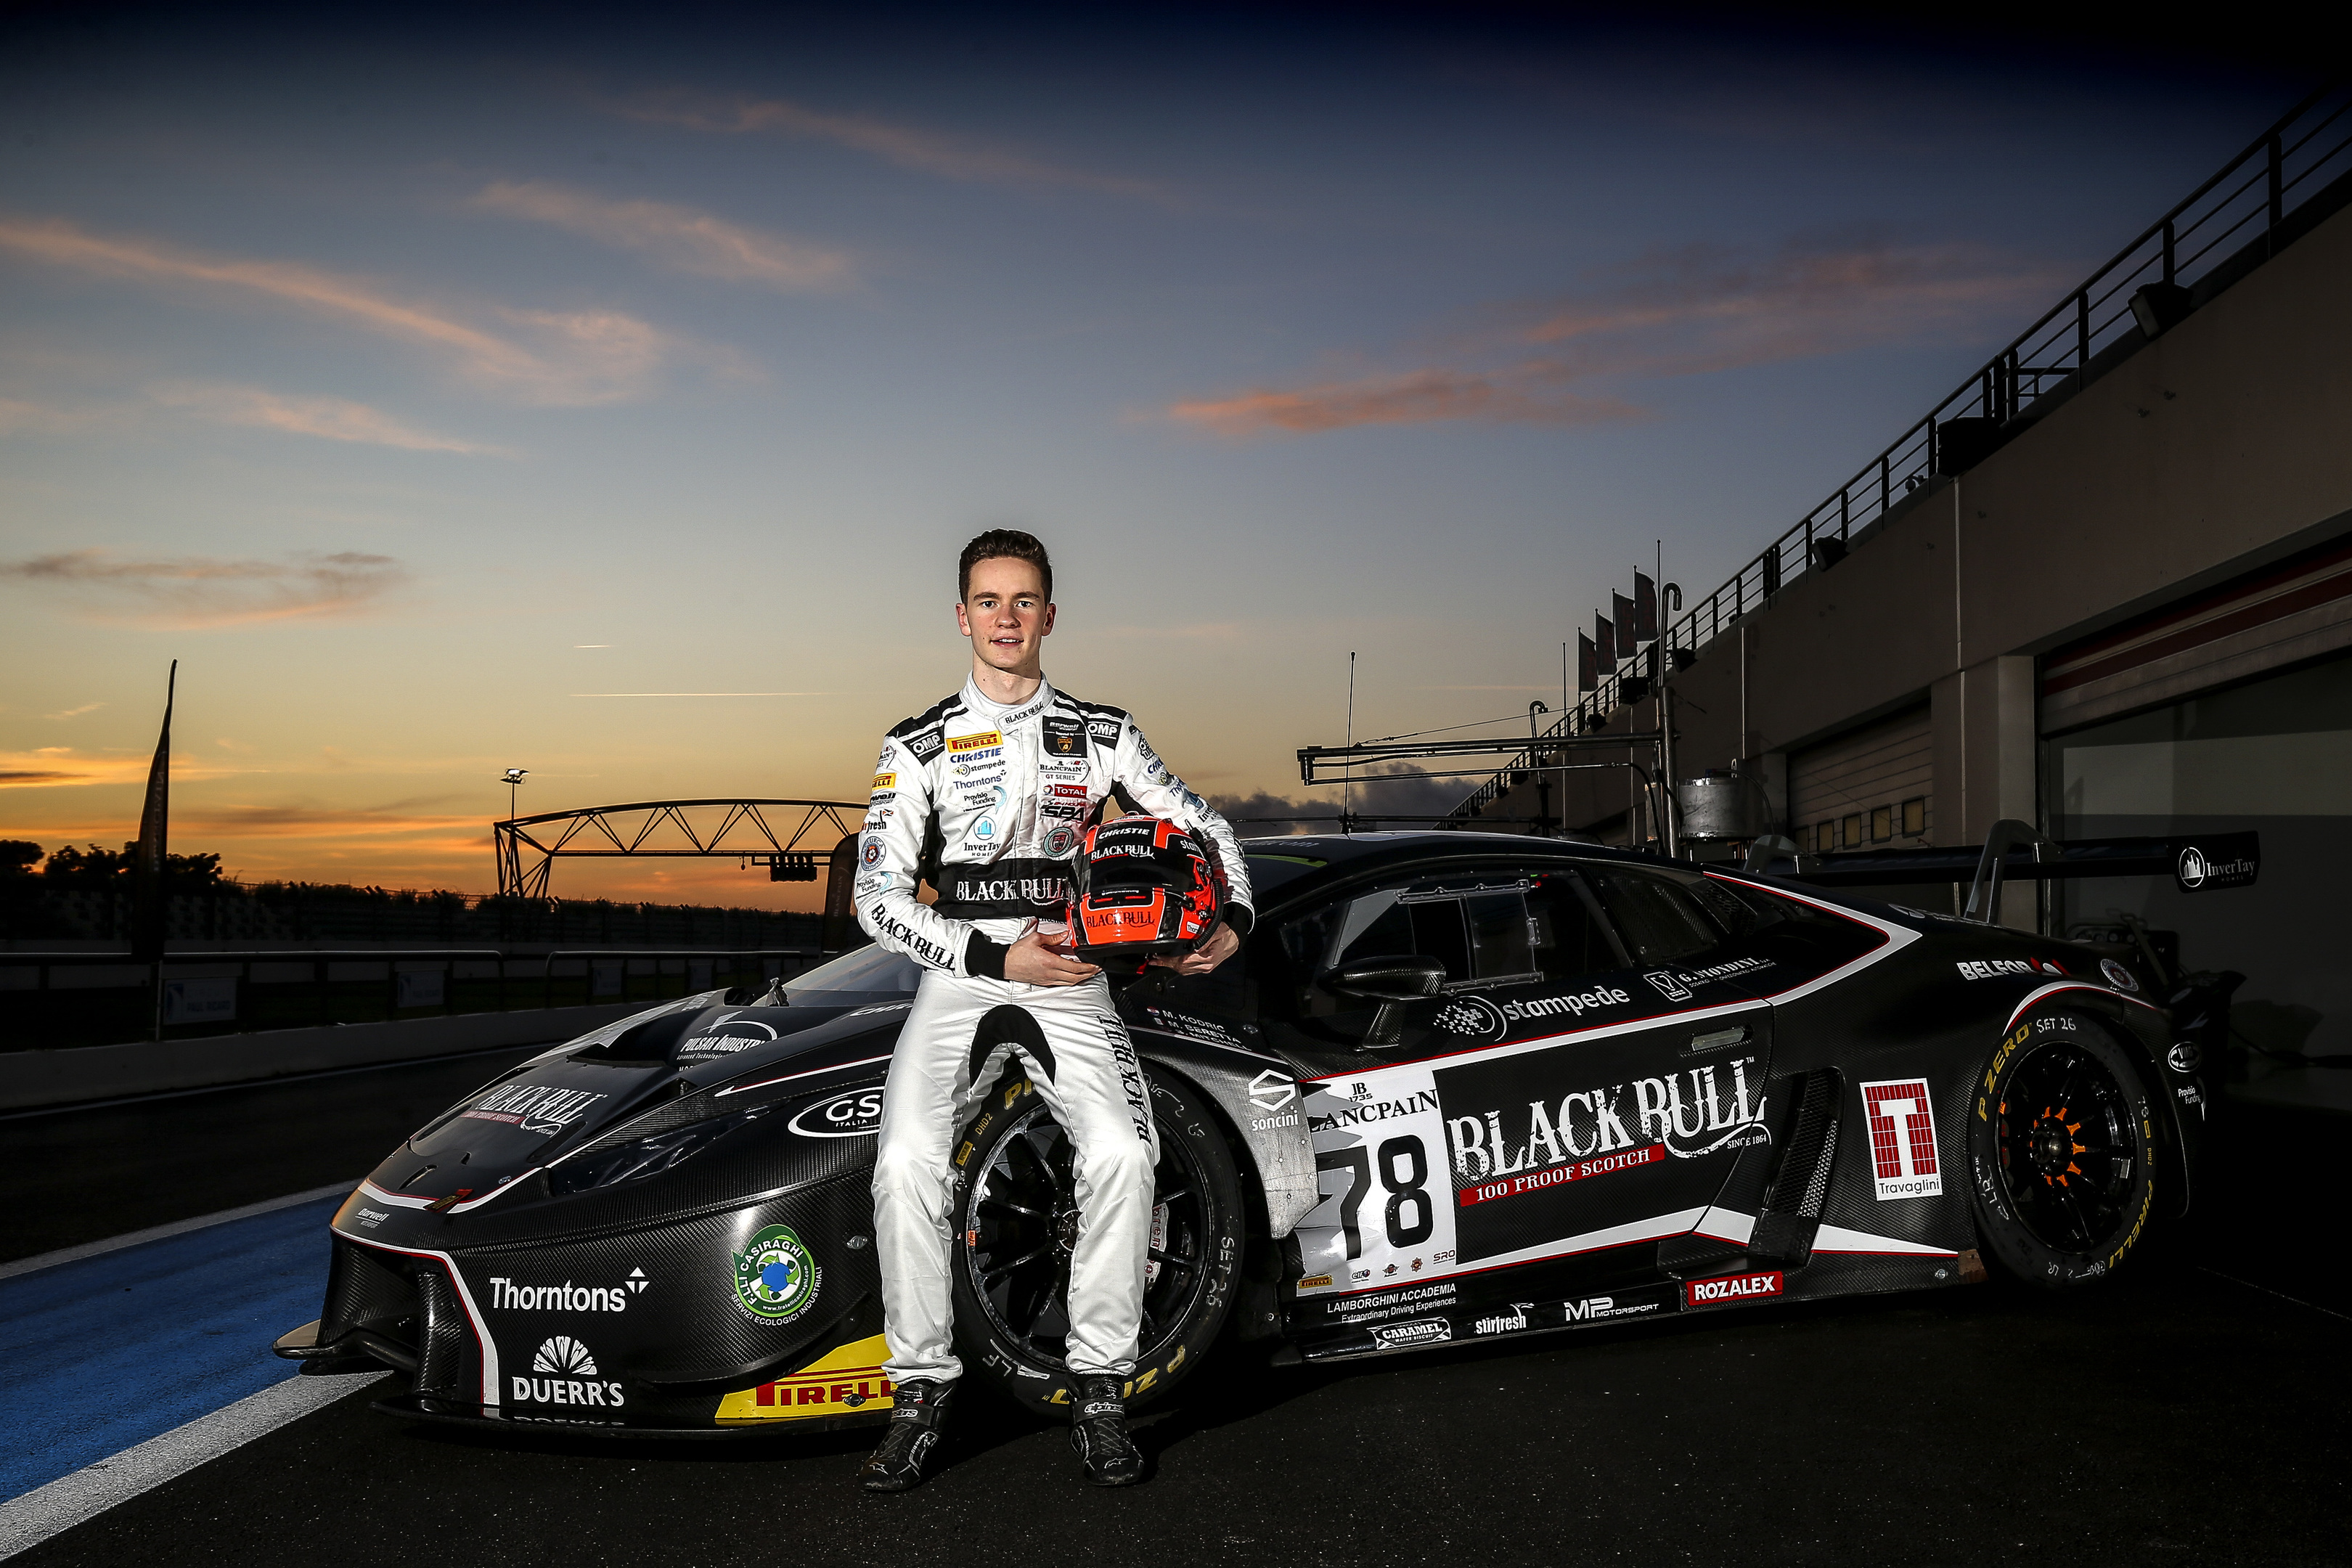 Sandy Mitchell contested the Blancpain Endurance Series in 2018